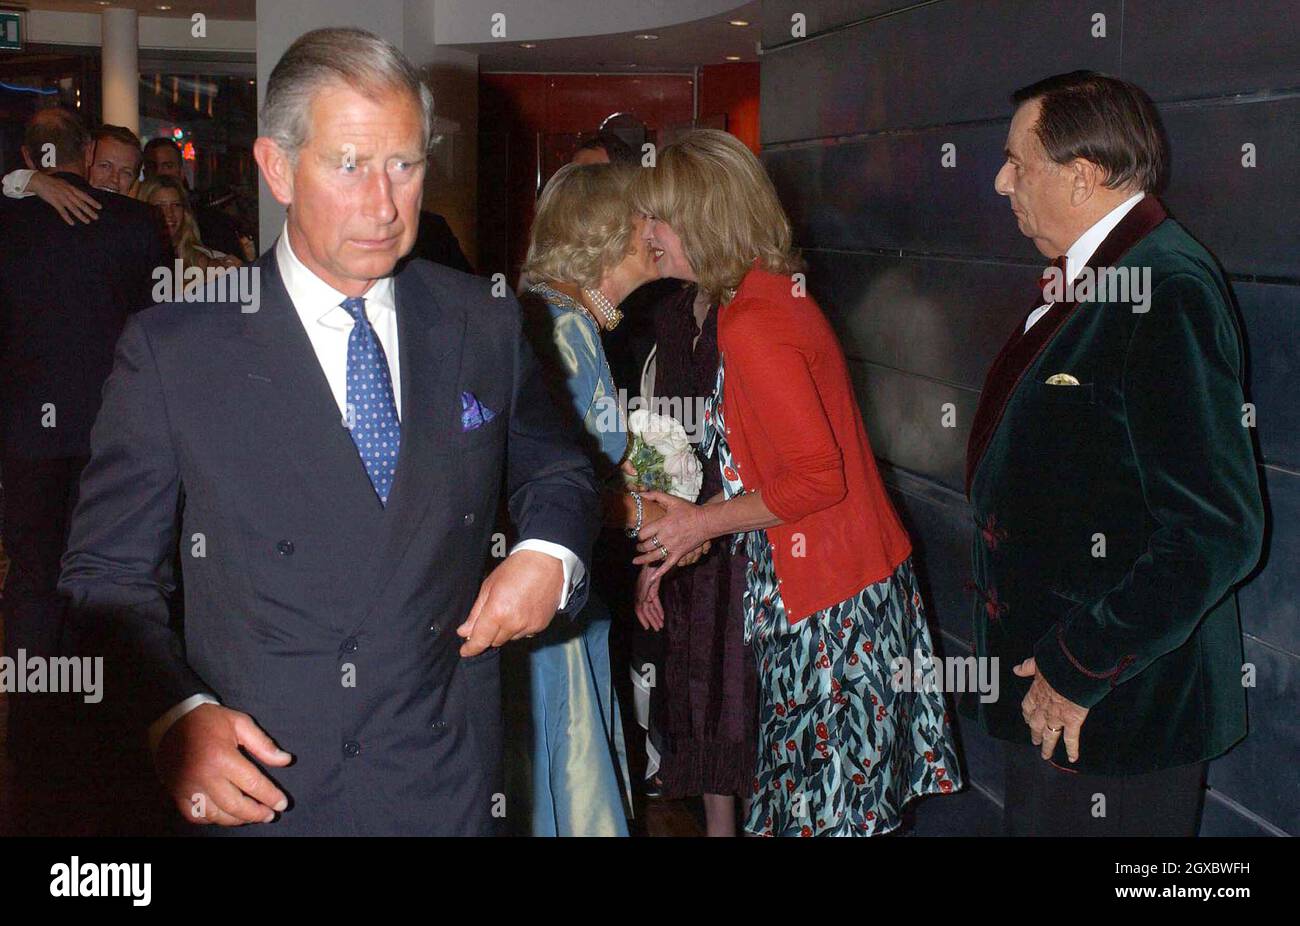 Prince Charles, Prince of Wales and Camilla, Duchess of Cornwall meet Joanna Lumley and Barry Humphries at the John Betjeman Centenary Gala in The Prince of Wales Theatre, London on September 10, 2006. Anwar Hussein/EMPICS Entertainment Stock Photo